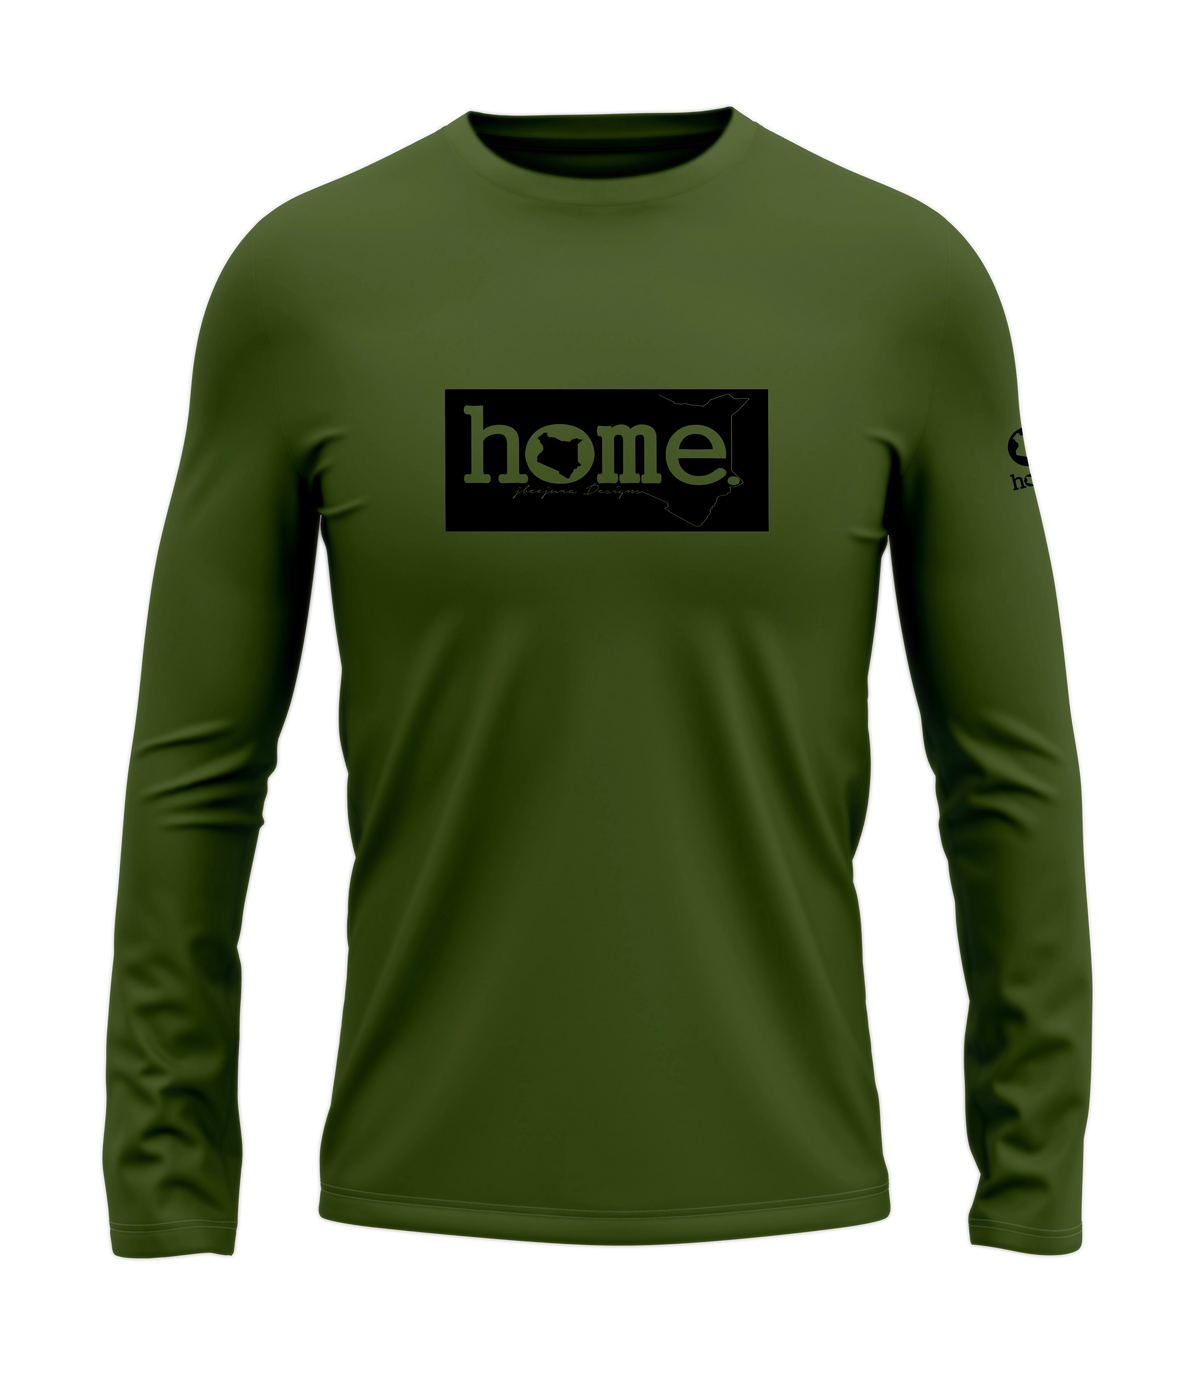 home_254 LONG-SLEEVED JUNGLE GREEN T-SHIRT WITH A BLACK CLASSIC PRINT – COTTON PLUS FABRIC